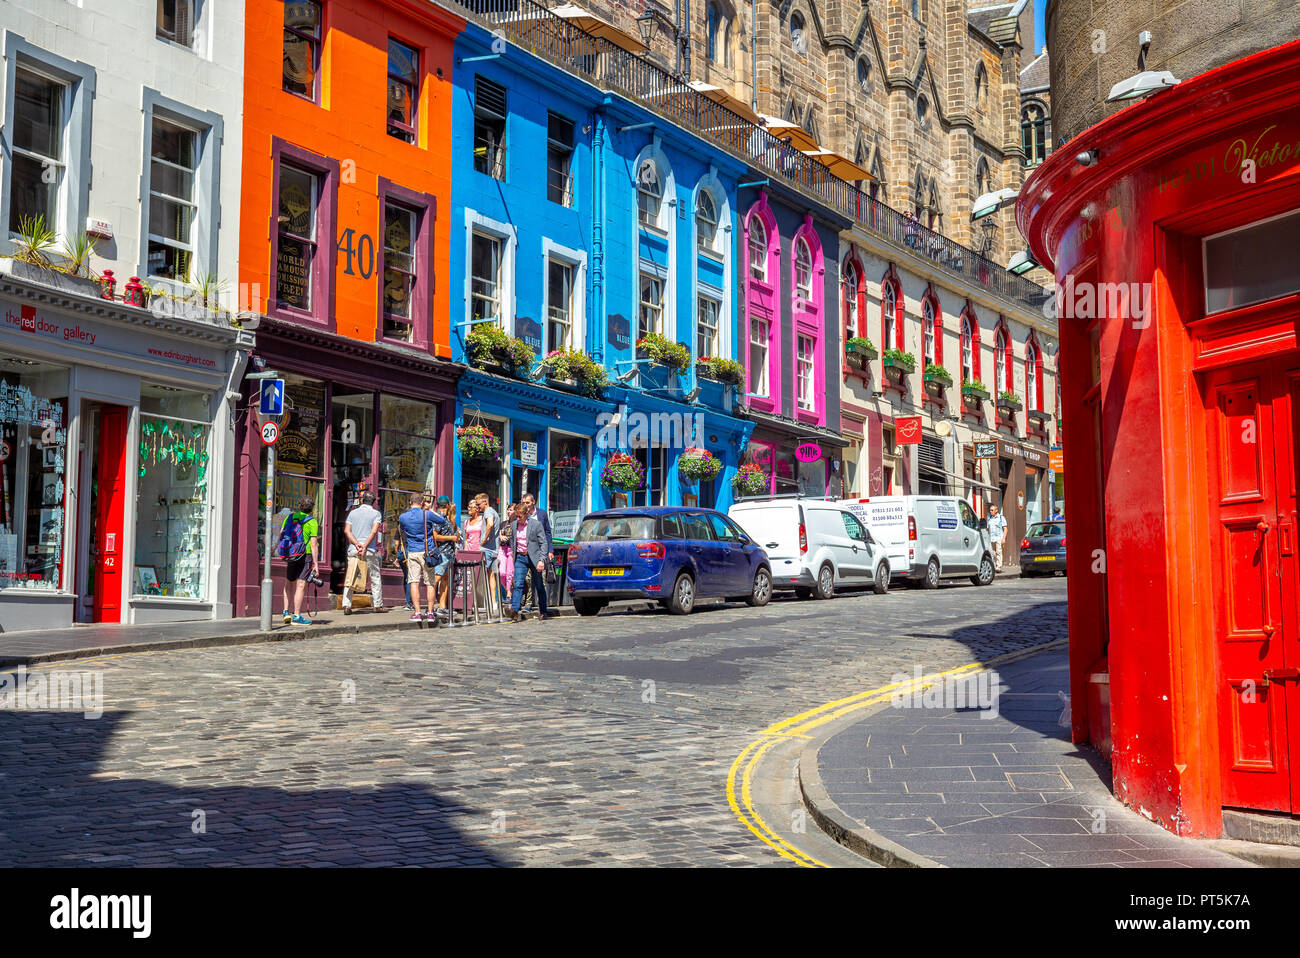 Edinburgh, UK - July 5, 2018: victoria street, built between 1829-34 as part of a series of improvements to the Old Town, with the aim of improving ac Stock Photo